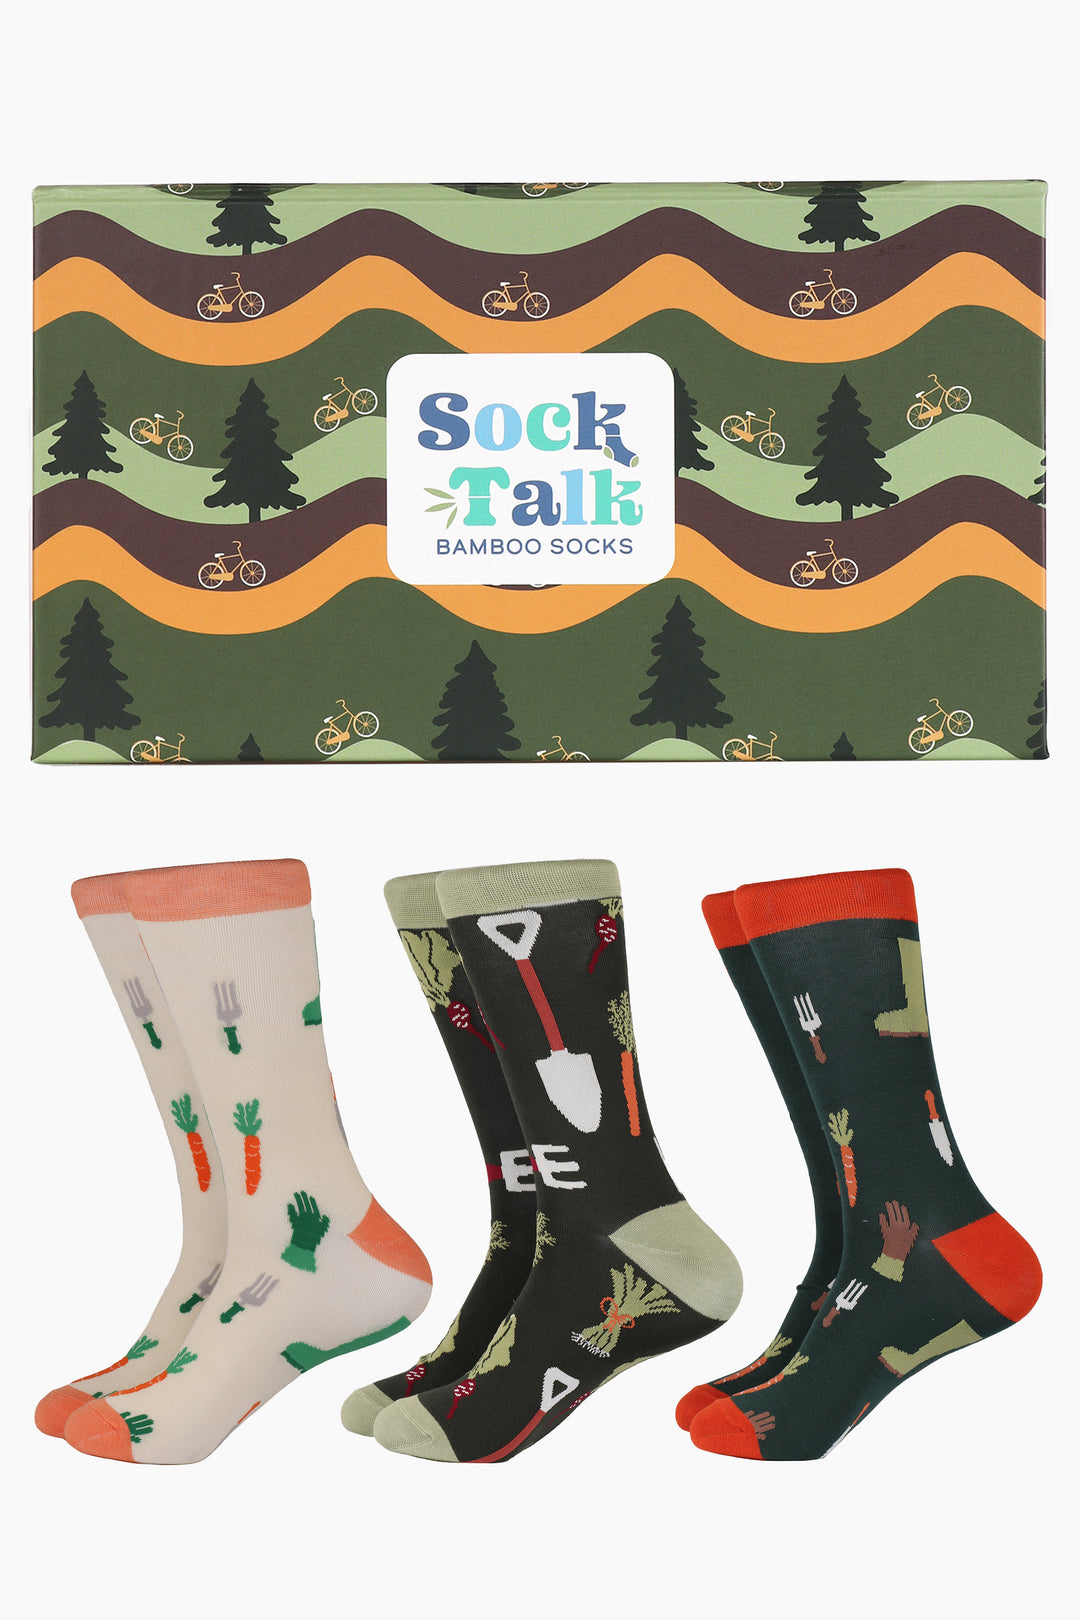 three pairs of gardening inspired bamboo socks in green and cream each featuring garden tools and plants, the gift box is green and features a forest scene with bikes and trees